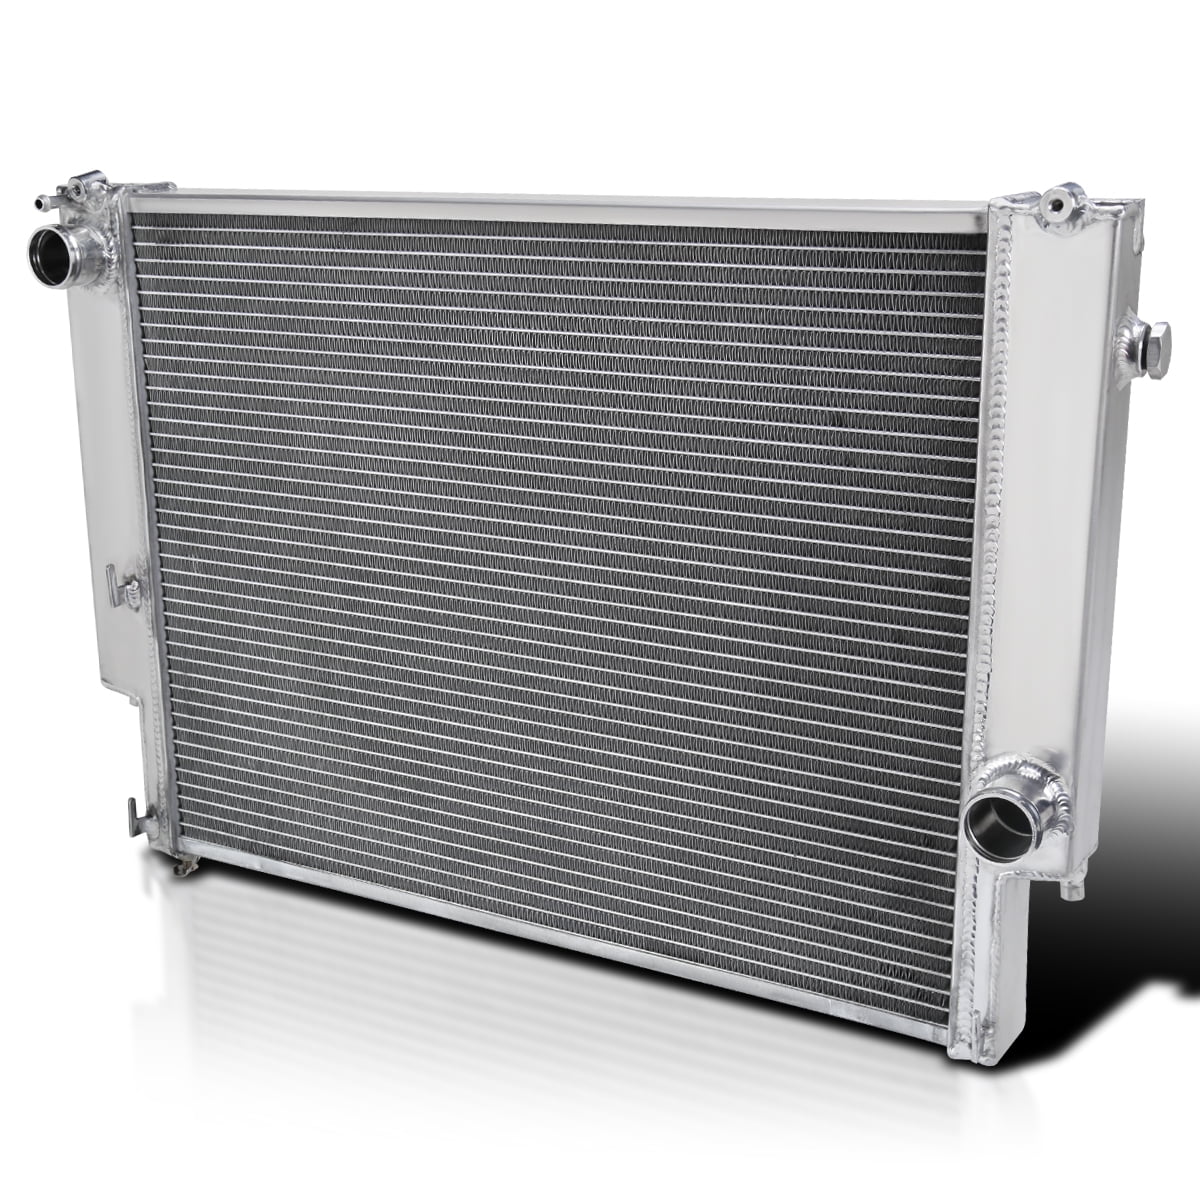 Spec-D Tuning Racing Full Aluminum 2 Row Radiator Compatible with 1992-1998  BMW E36 318 323 325 328 M3 E36